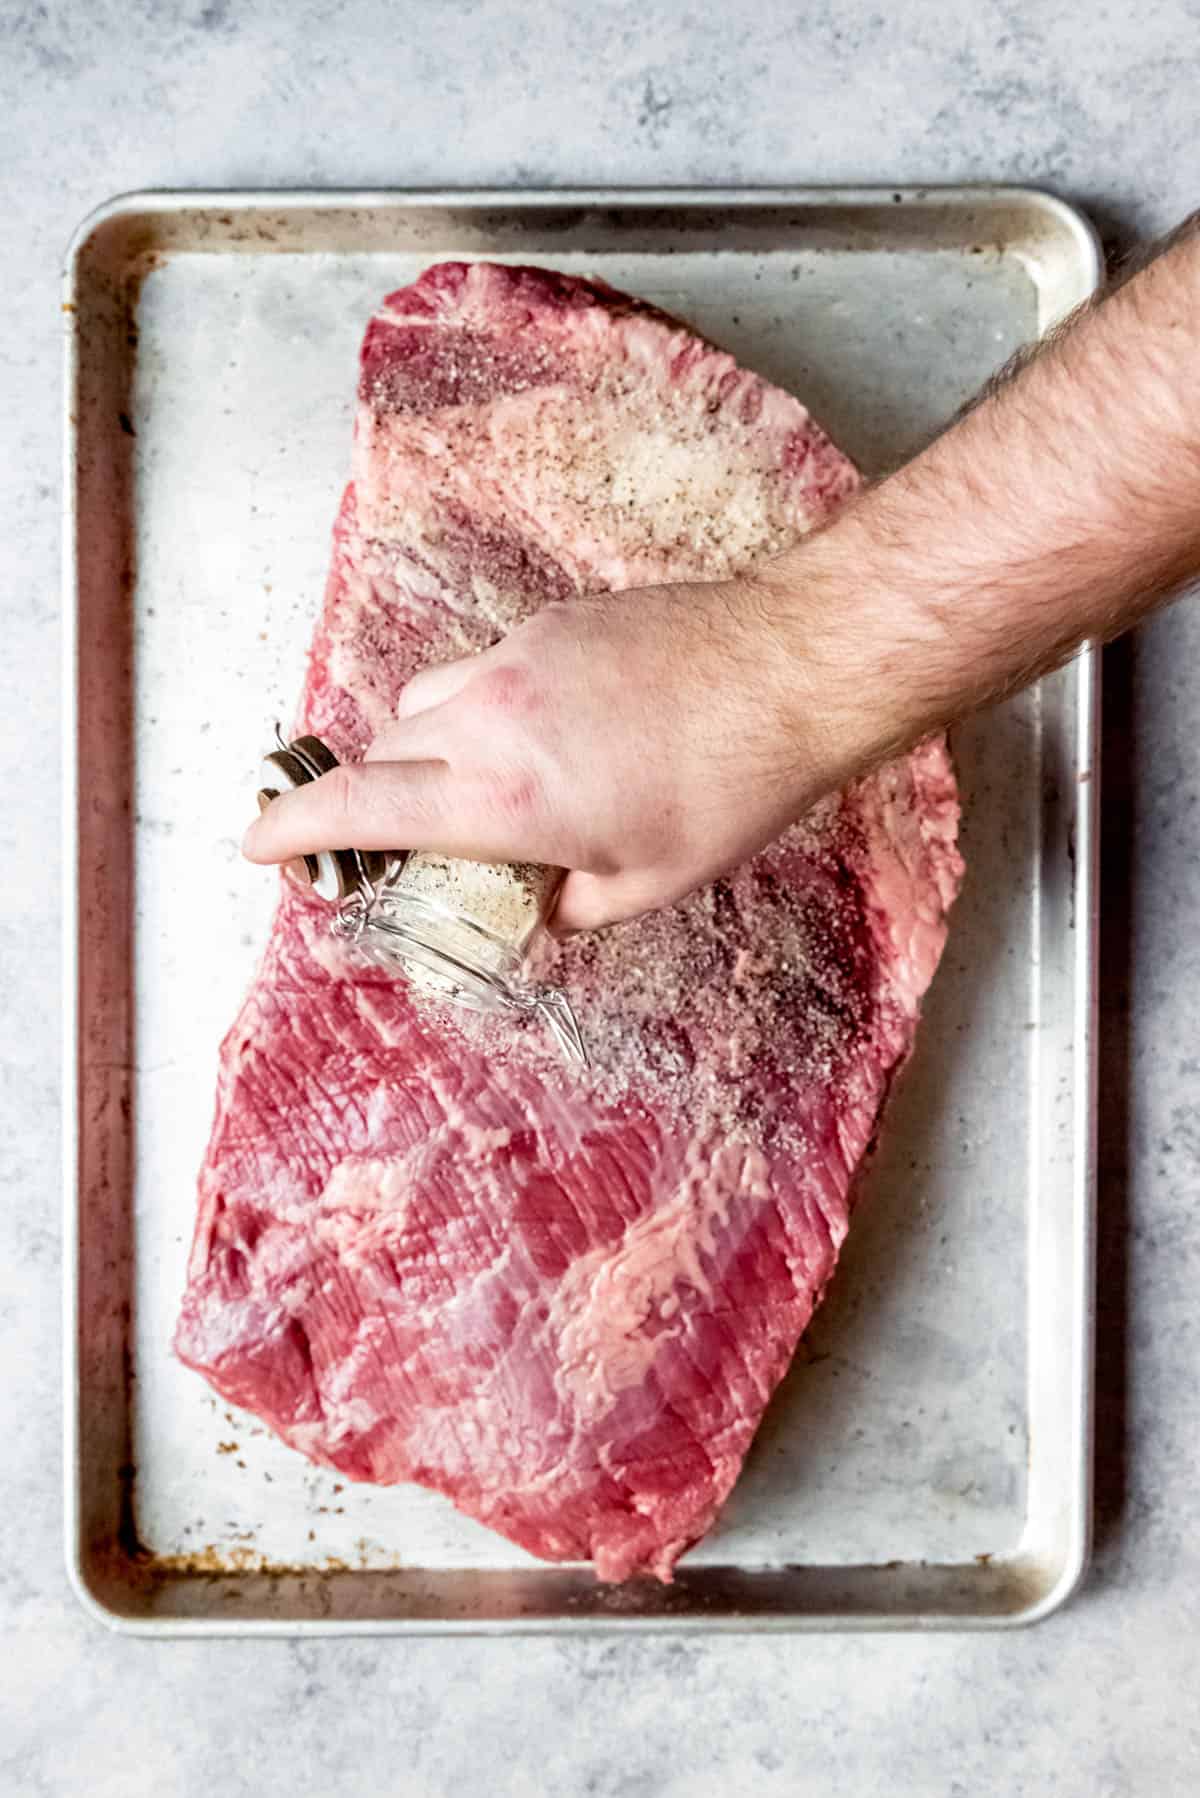 An image of a person's hand sprinkling a salt, pepper, and garlic rub over a trimmed beef brisket.